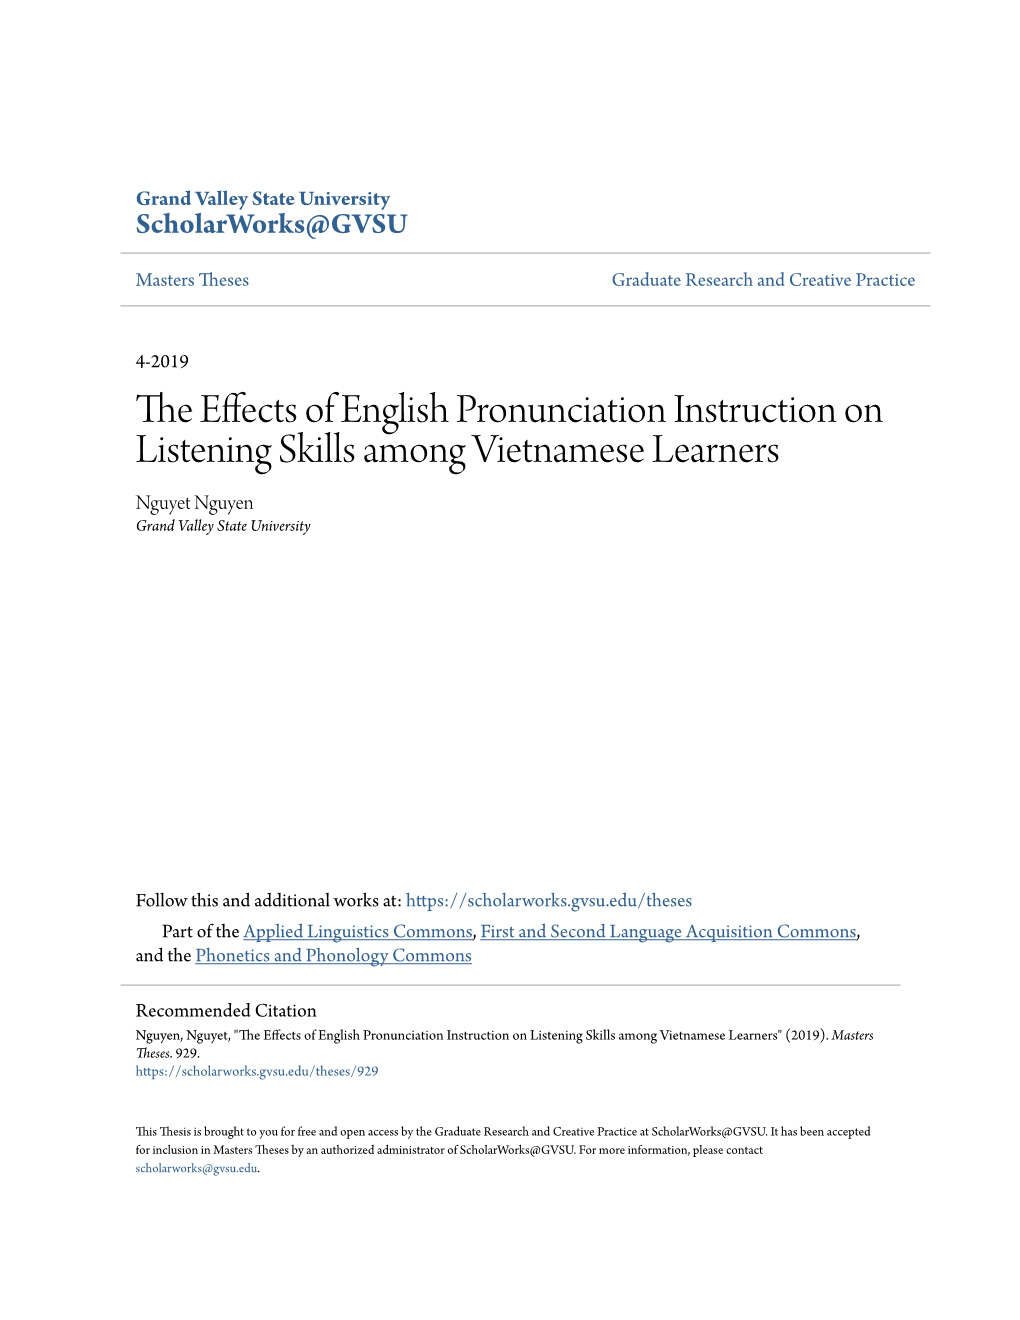 The Effects of English Pronunciation Instruction on Listening Skills Among Vietnamese Learners" (2019)